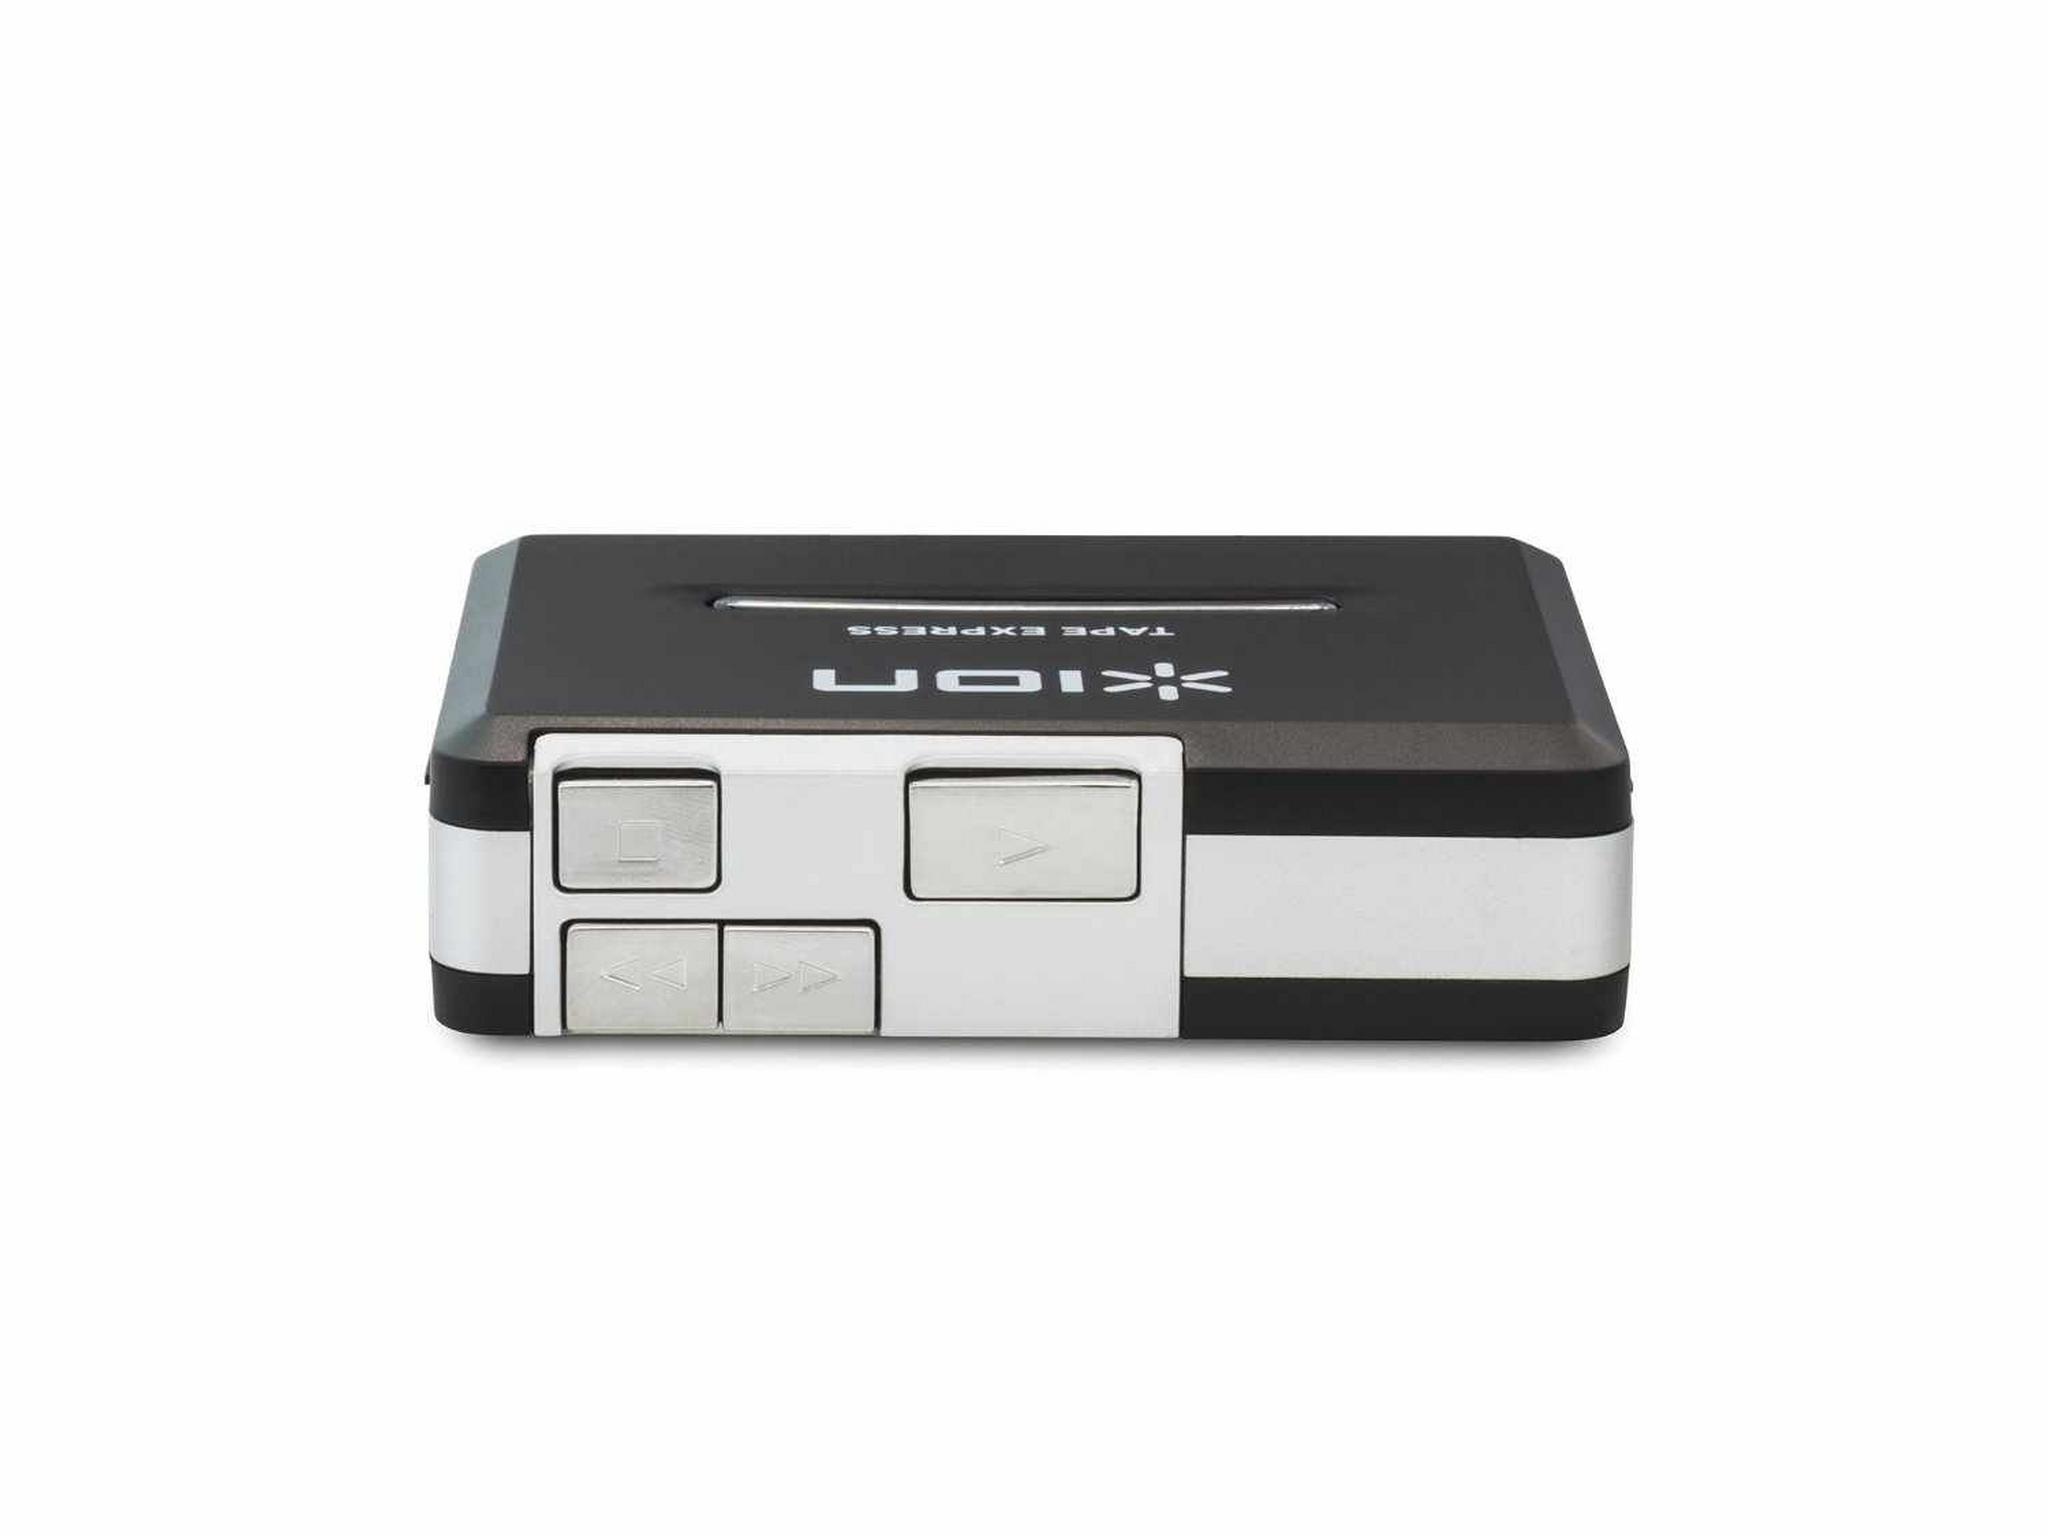 ION Tape Express Portable Analog To Digital Cassette Converter